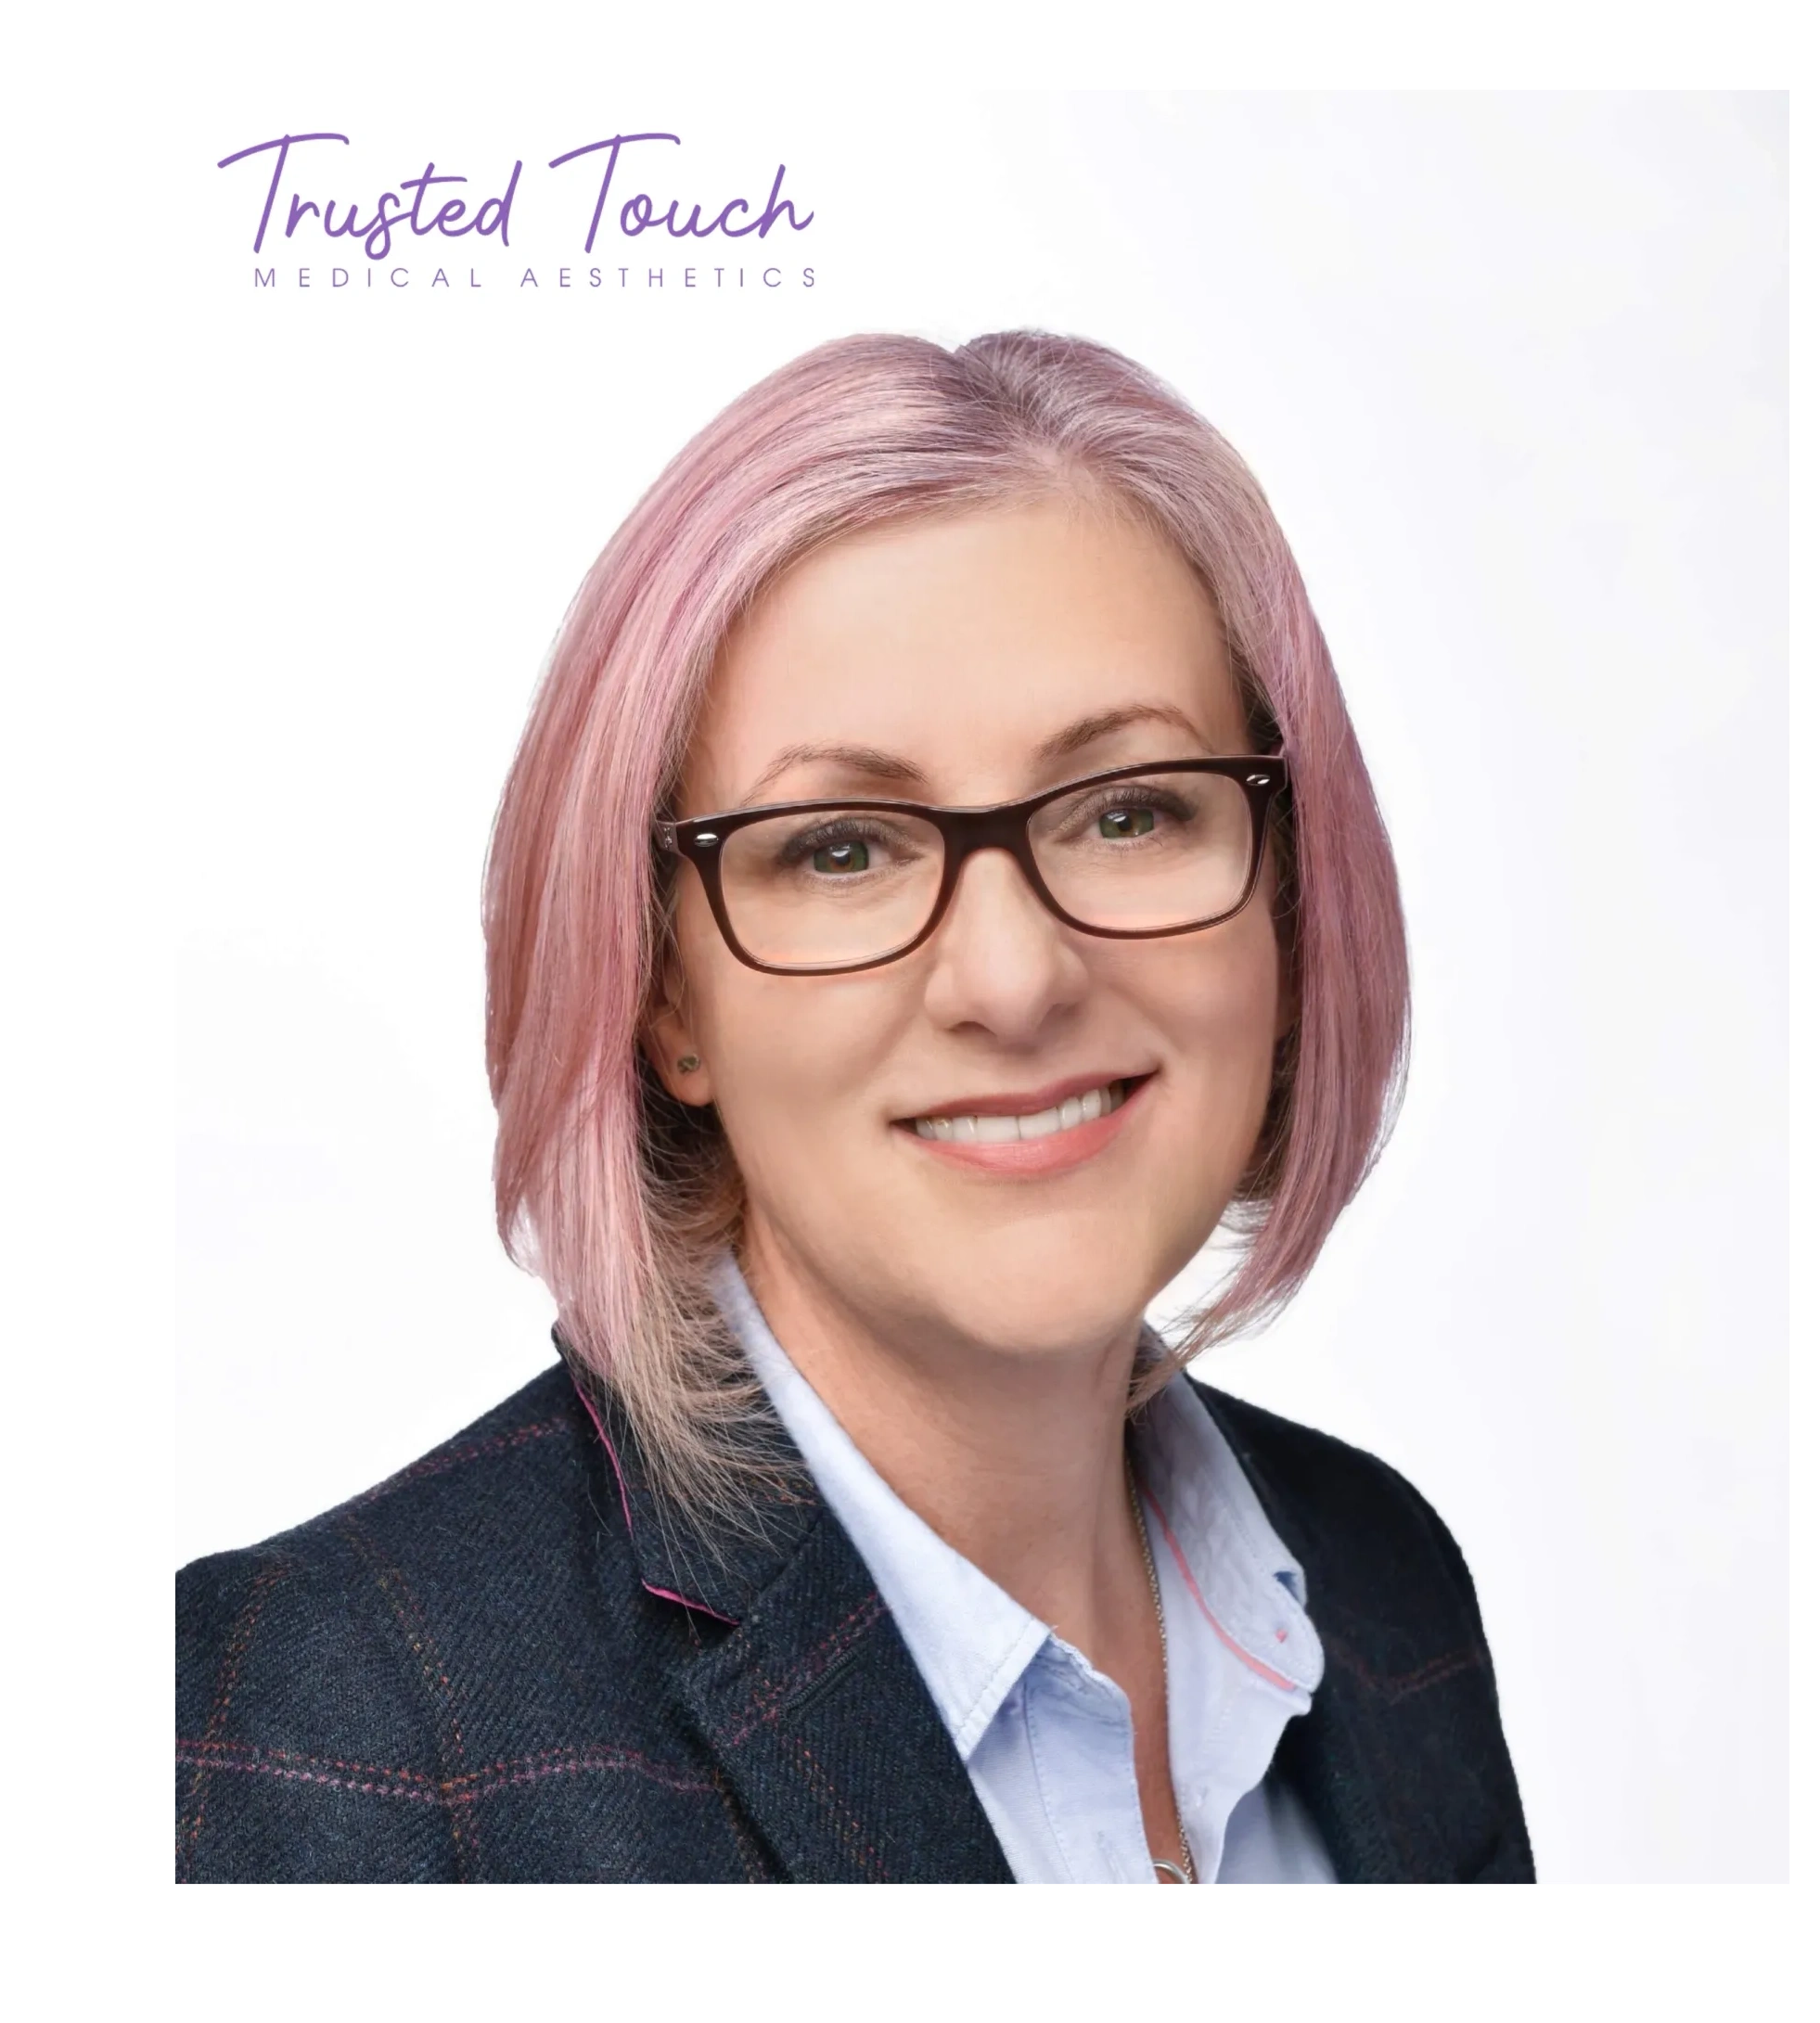 Rachel Jefford CEO & Founder of Trusted Touch Medical Aesthetics